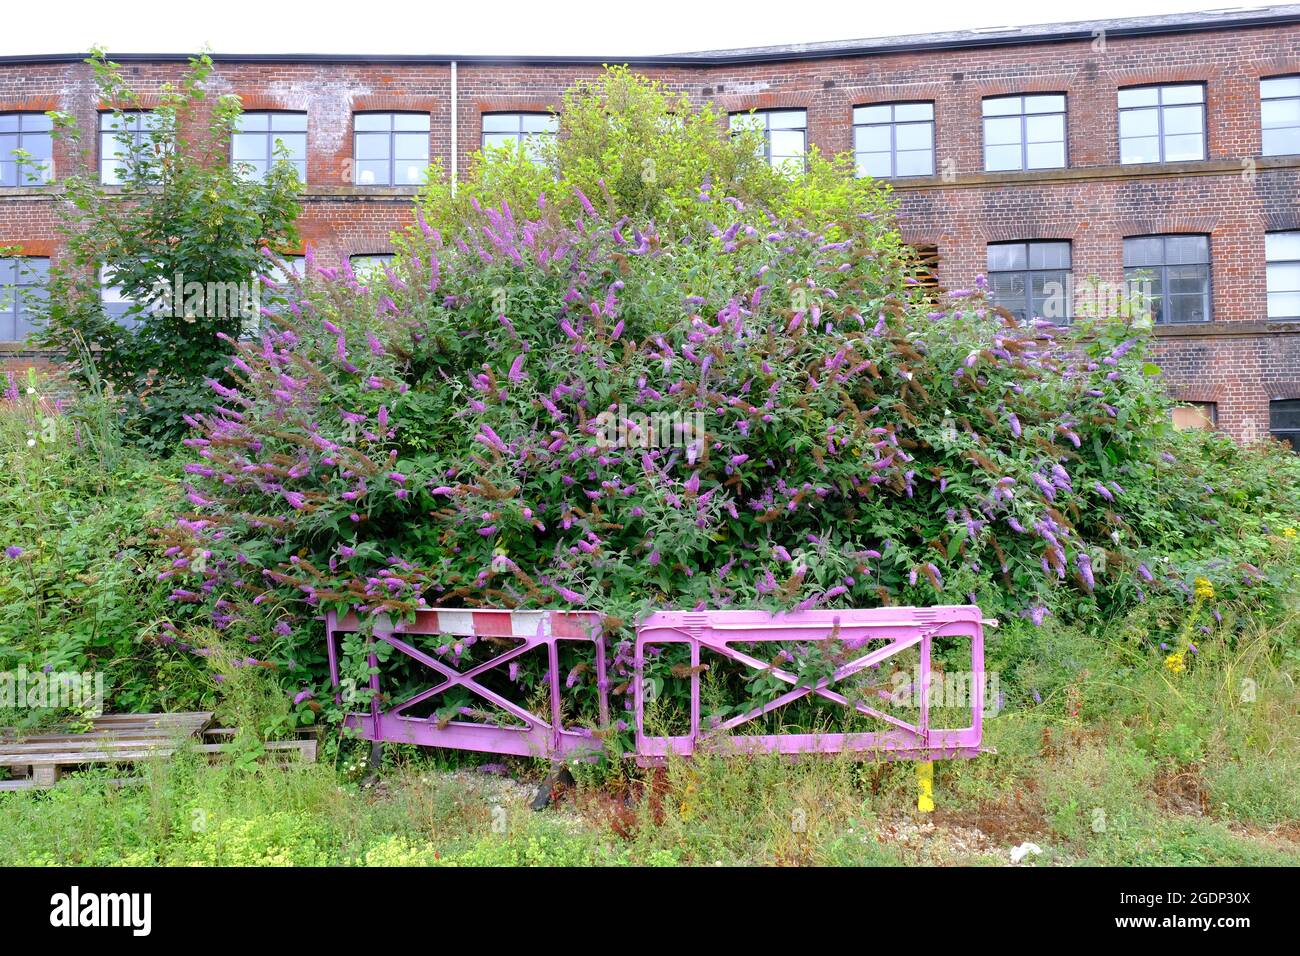 Giant buddleia bush with bright purple flowers towering over a discarded road barrier of the same colour. Stock Photo